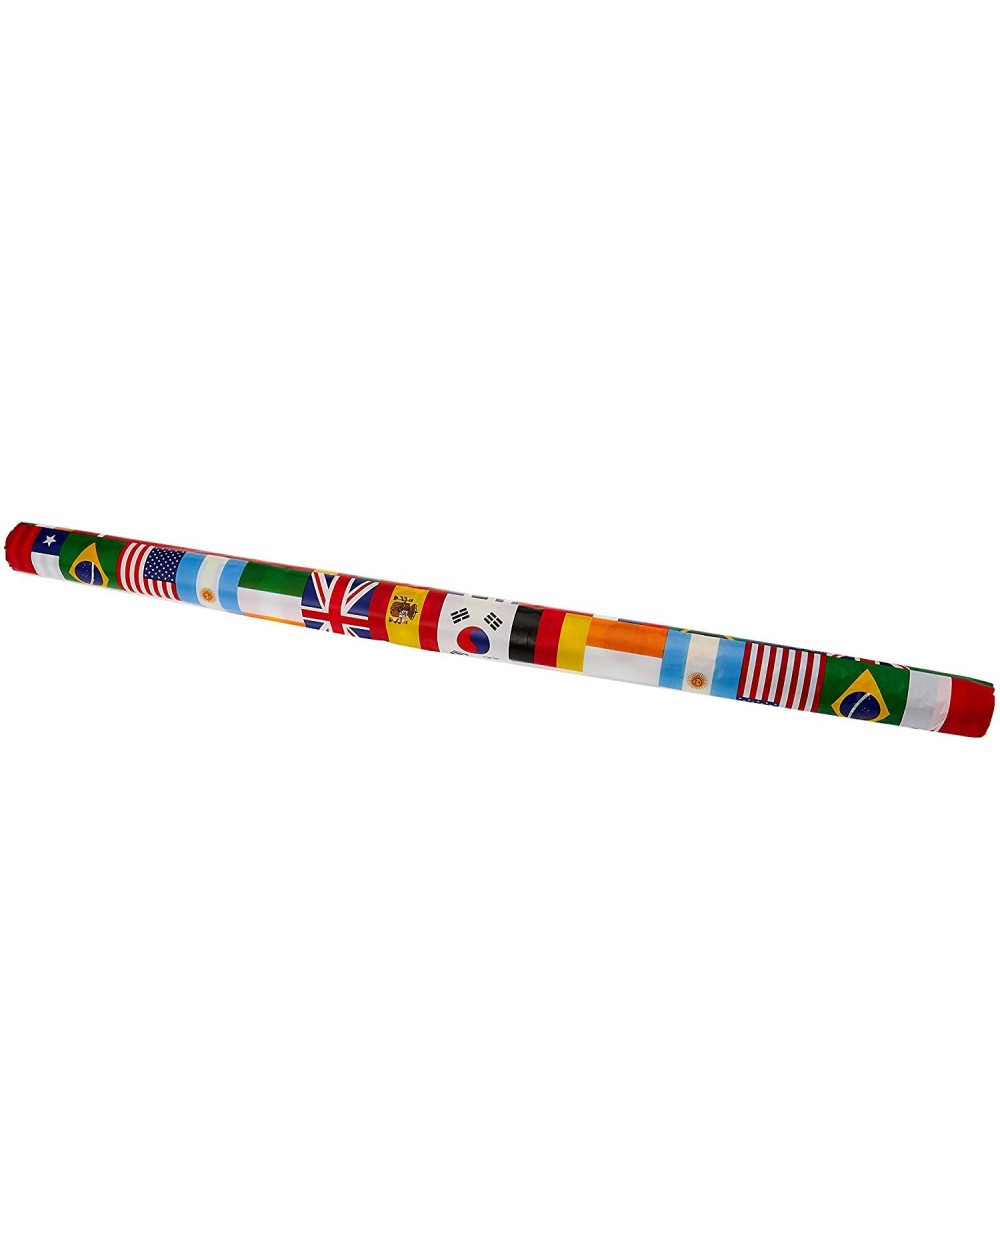 Tablecovers International FlagTable Roll- 40-Inch by 100-Feet- Multicolor - C311Q8WQPMD $19.96